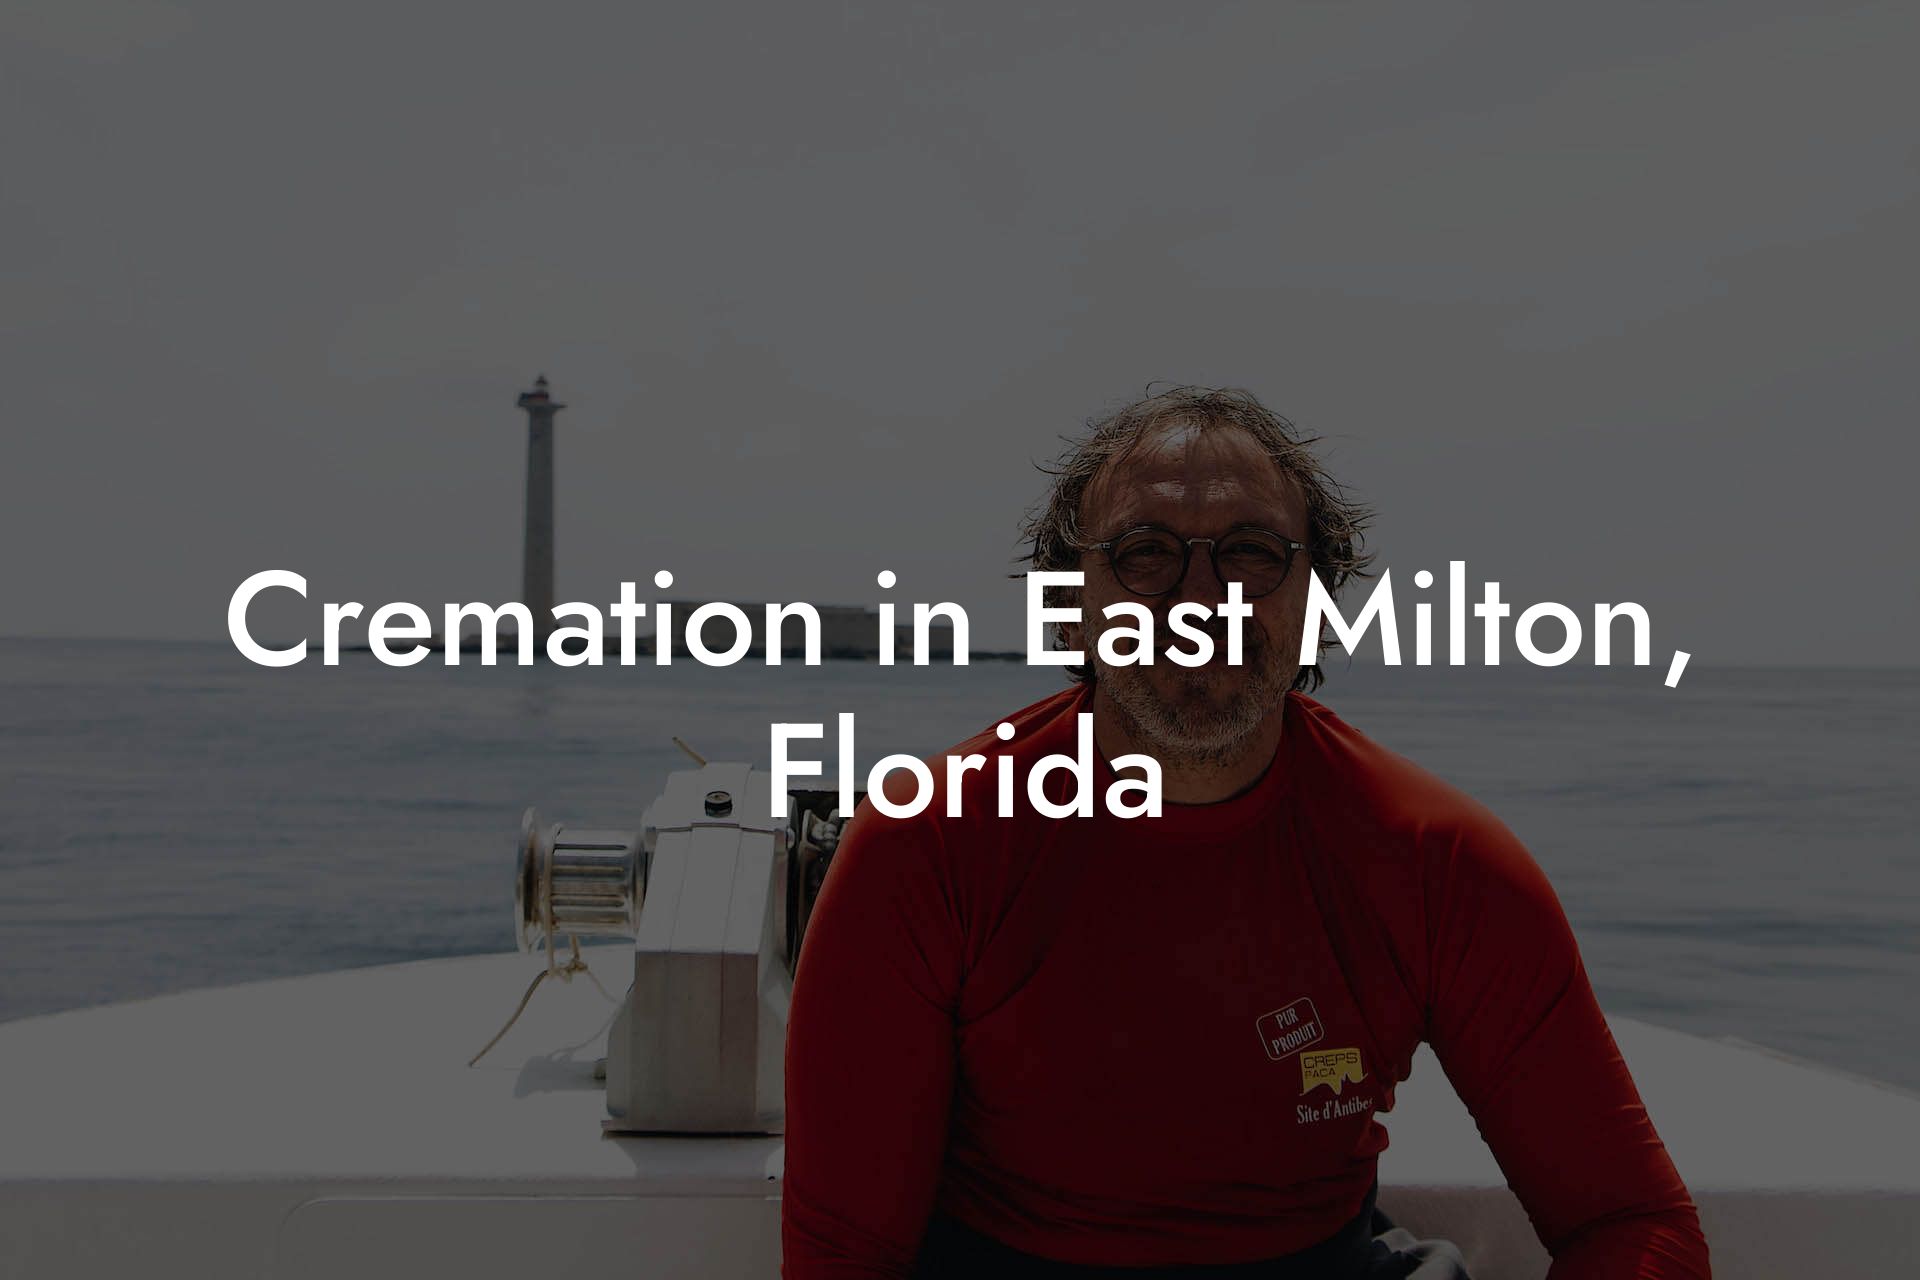 Cremation in East Milton, Florida